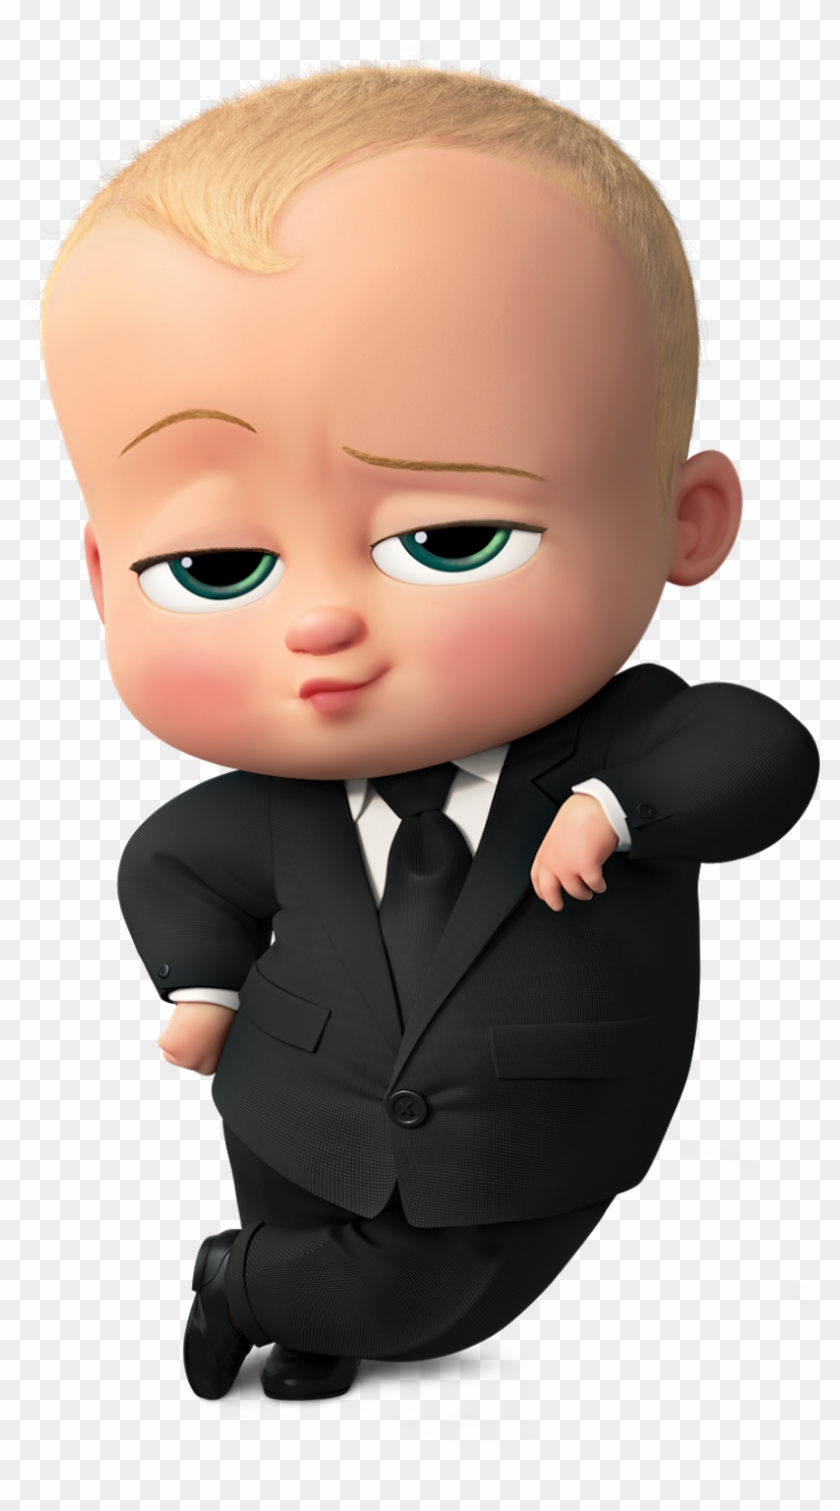 The Boss Baby - Boss Baby, HD Png - 1088x1600(#448237) - PngFind